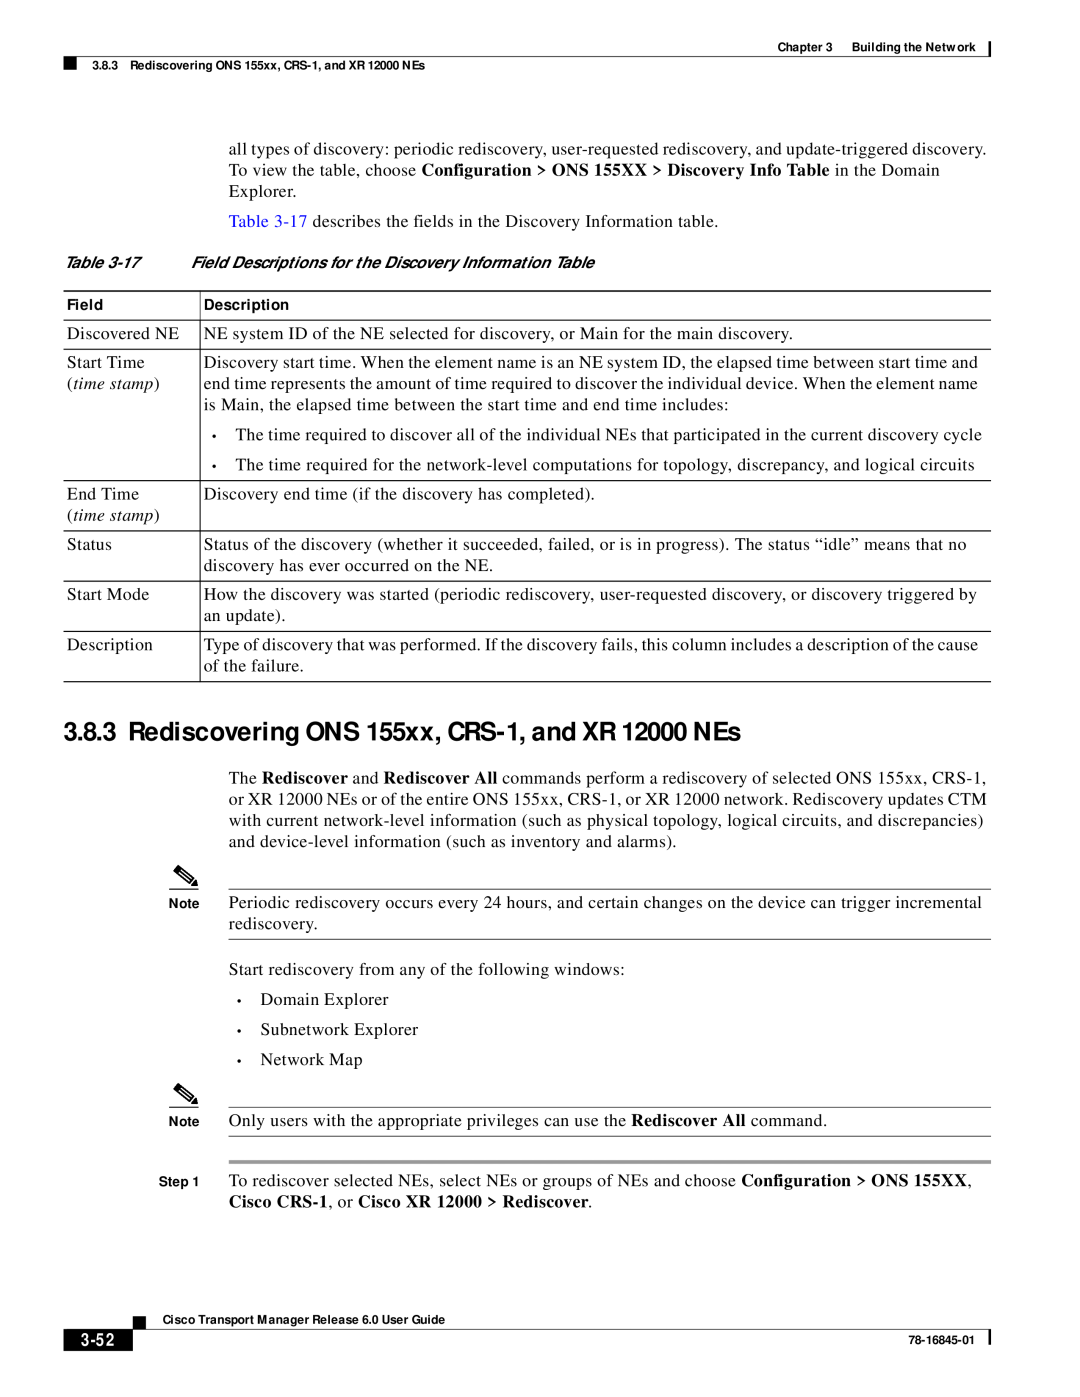 Cisco Systems 78-16845-01 manual Rediscovering ONS 155xx, CRS-1, and XR 12000 NEs, time stamp, 3-52 